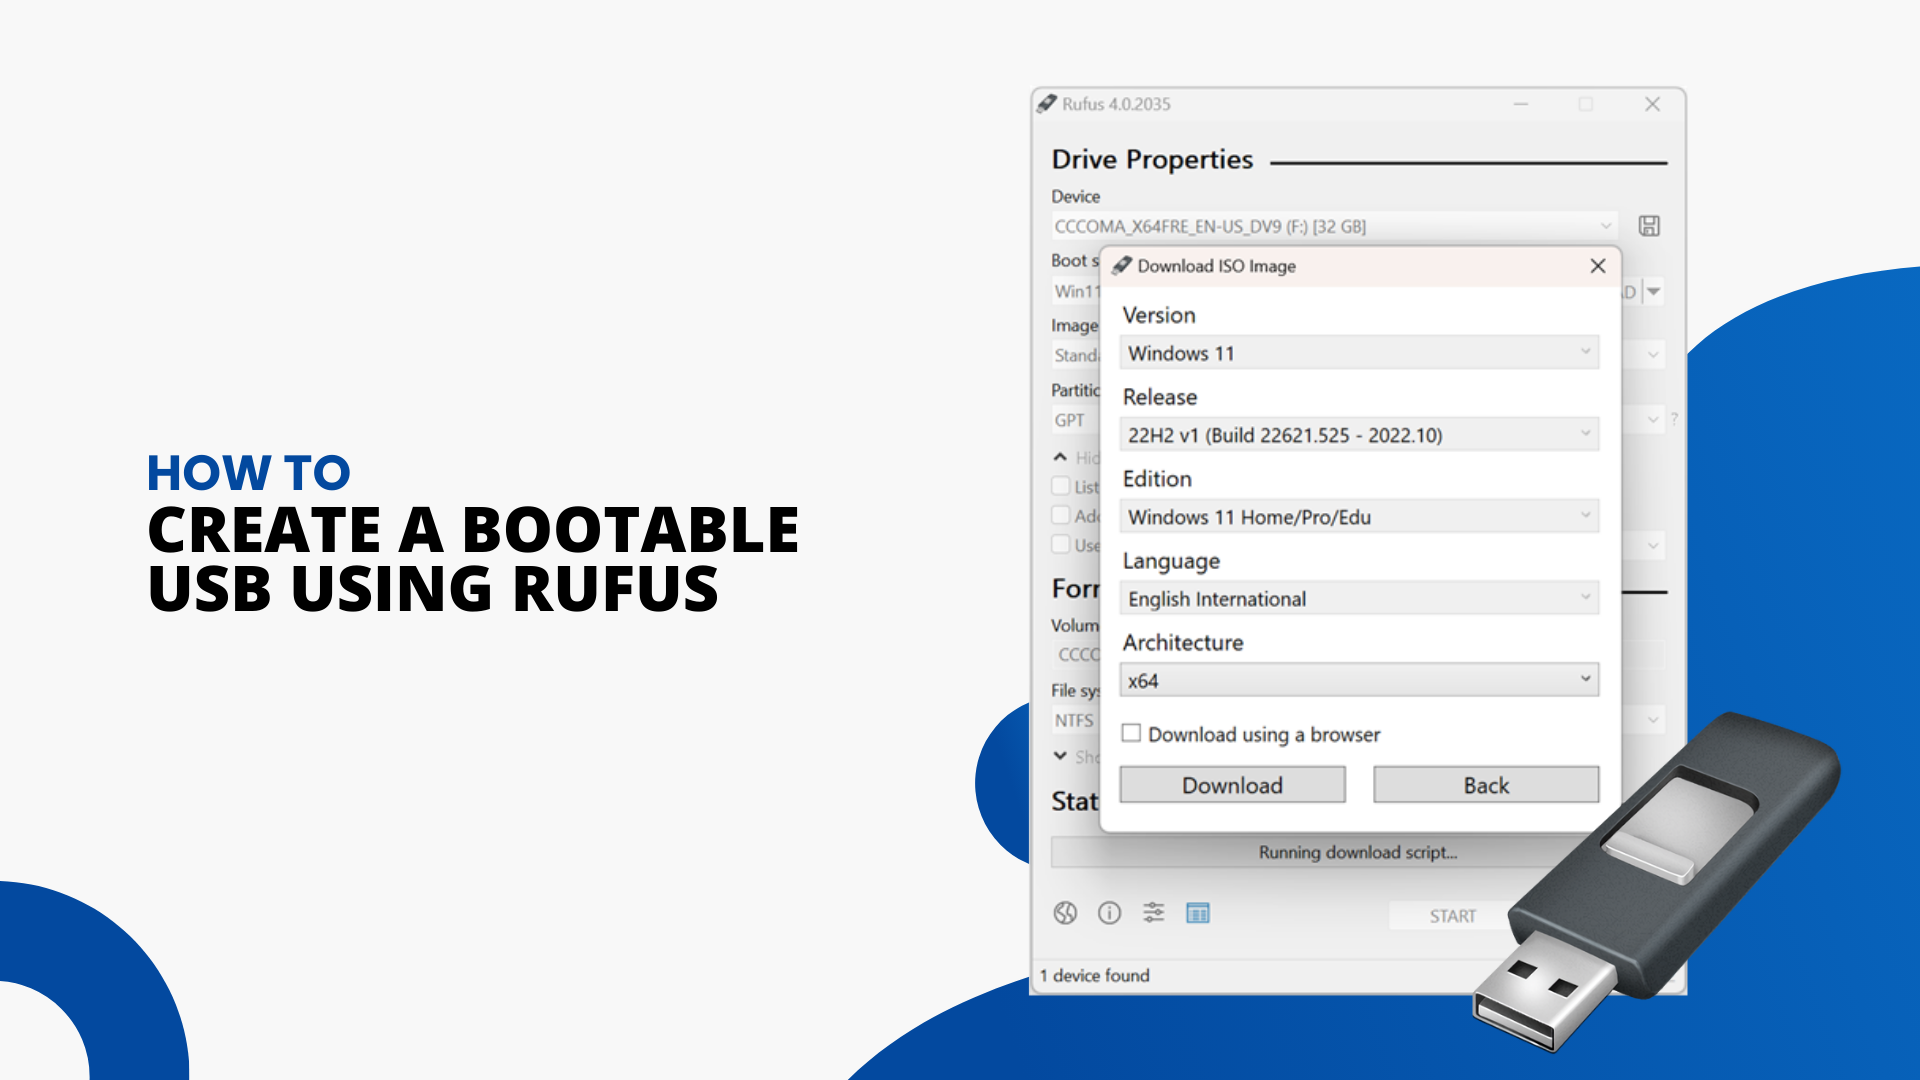 How to Create a Bootable USB Using Rufus